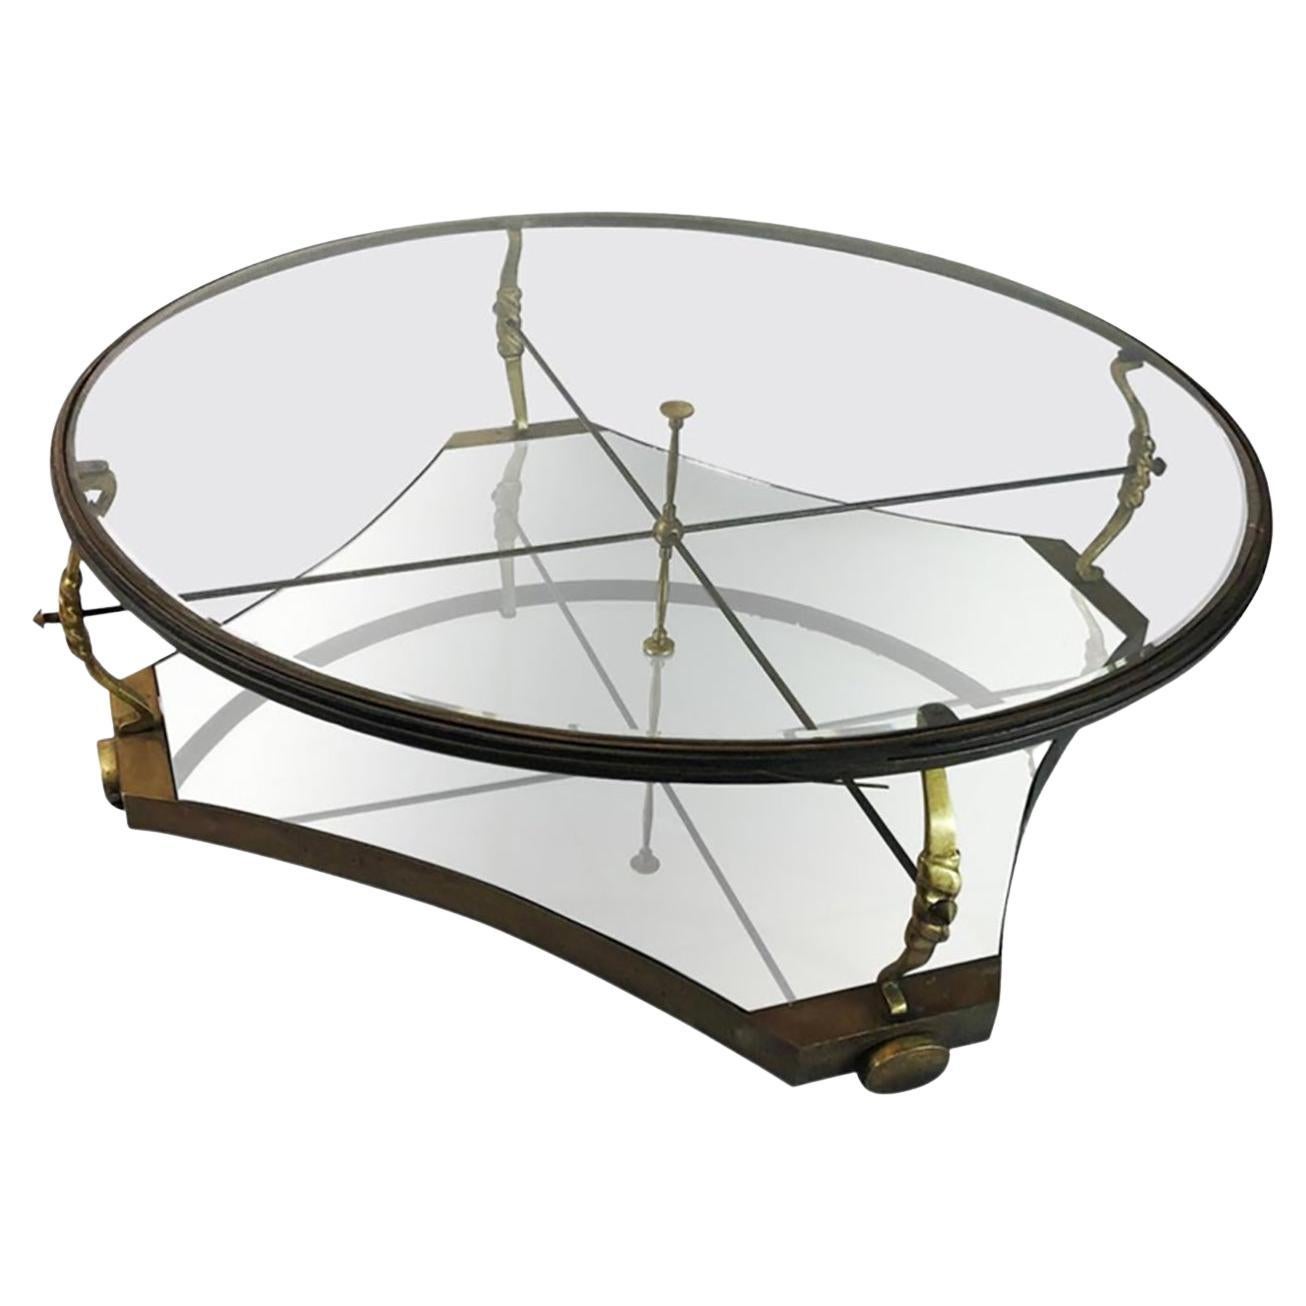 Mexican Modernist Cocktail Table by Arturo Pani For Sale